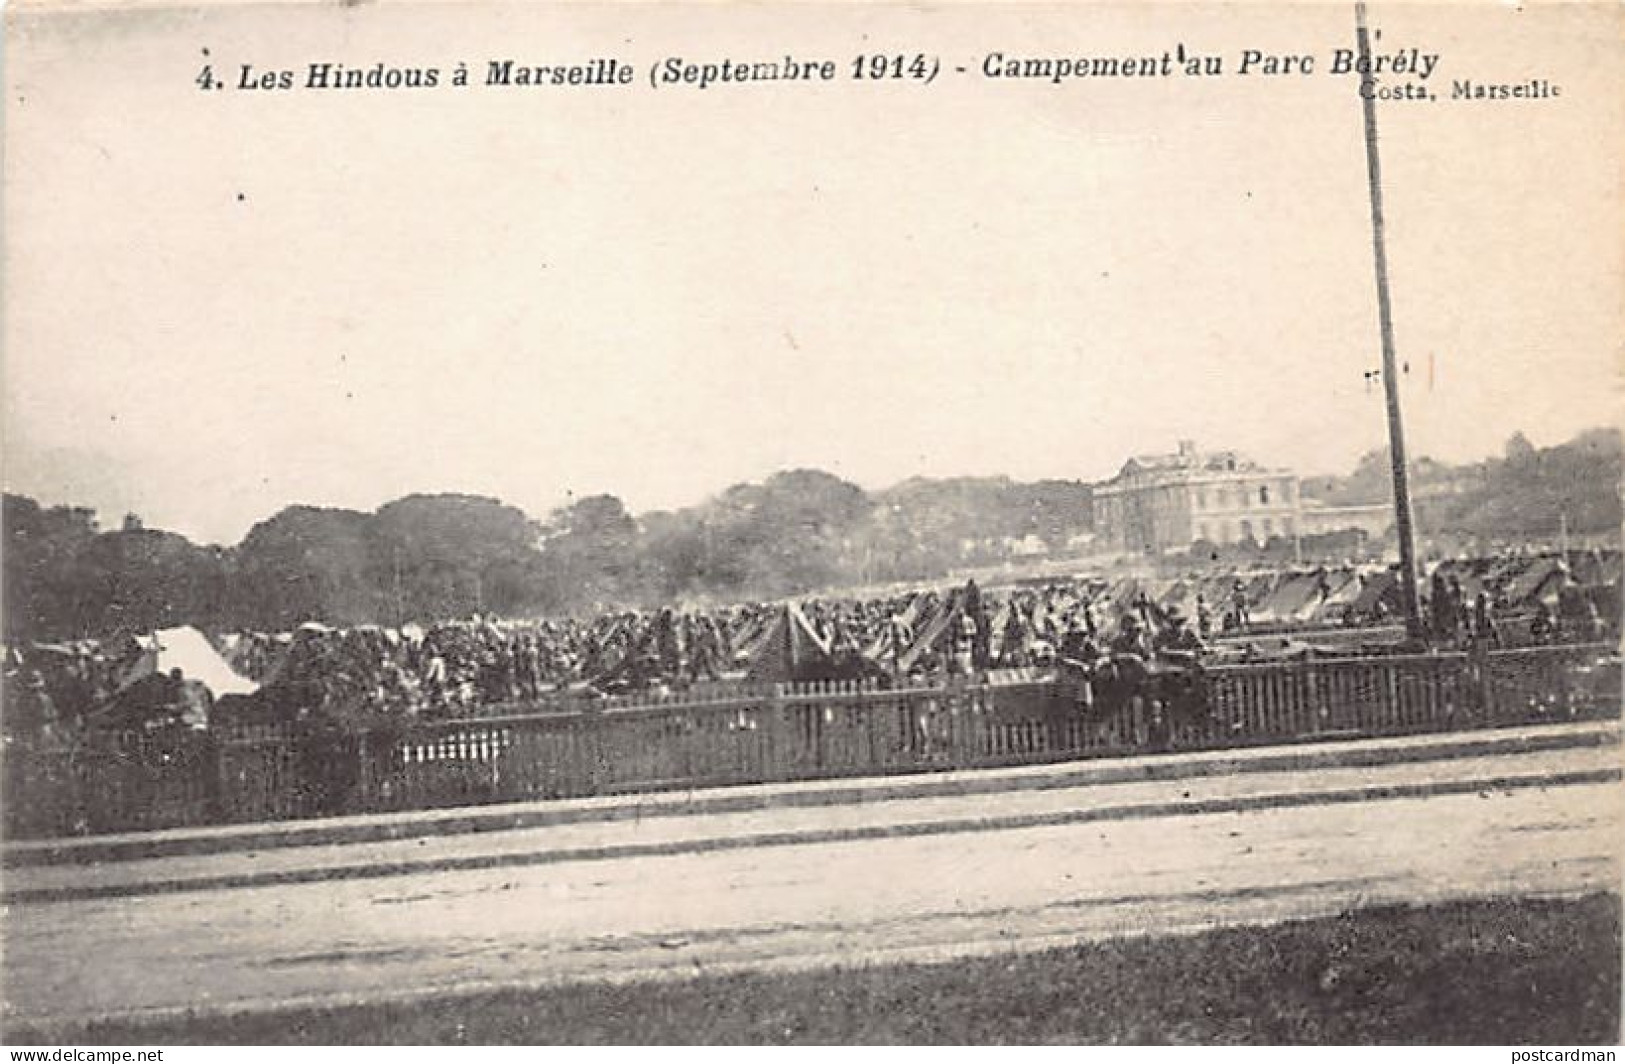 India - WORLD WAR ONE - Arrival Of The Indian Army In Marseille, France (September 1914) - Camp Of The Soldiers In Parc  - India